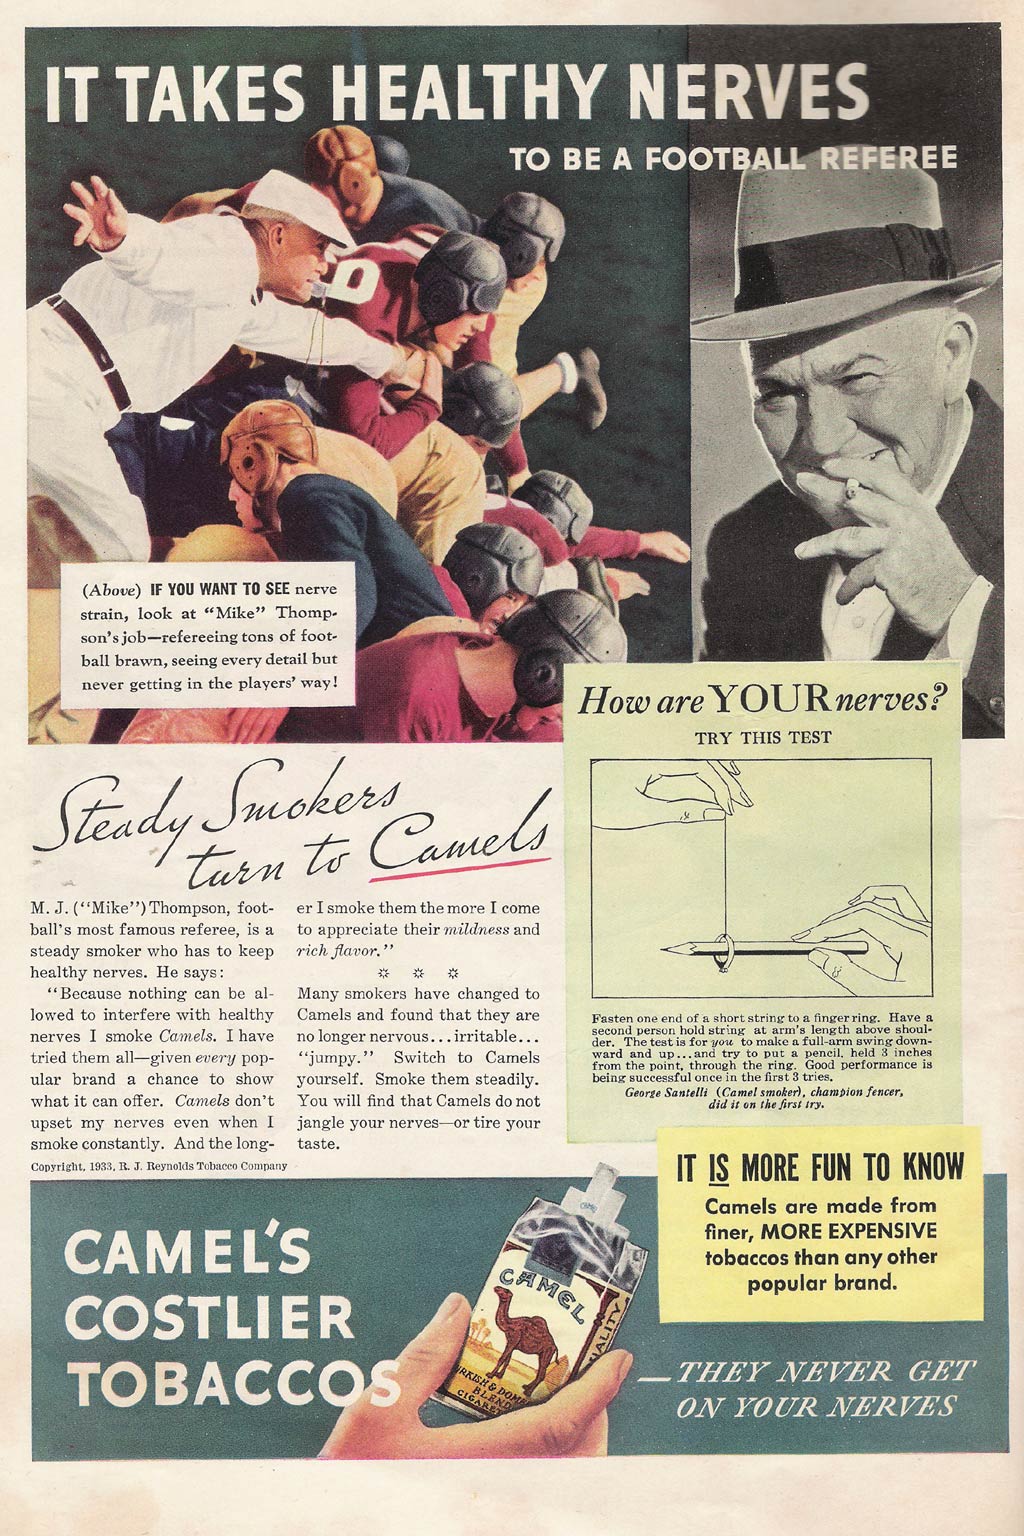 an advertit advertising a tobacco company